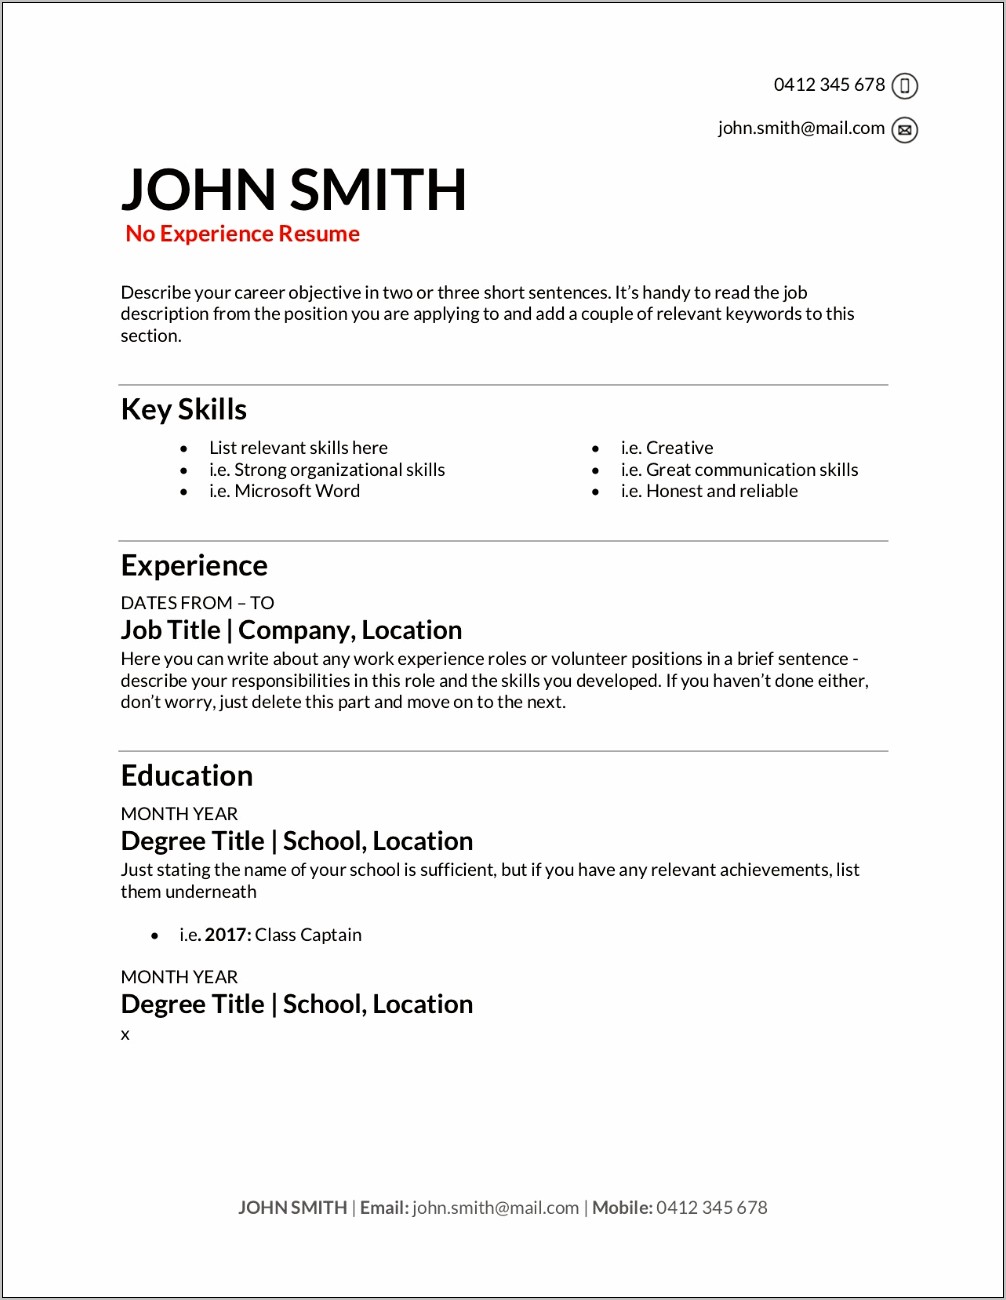 Sample Resume For Less Experienced